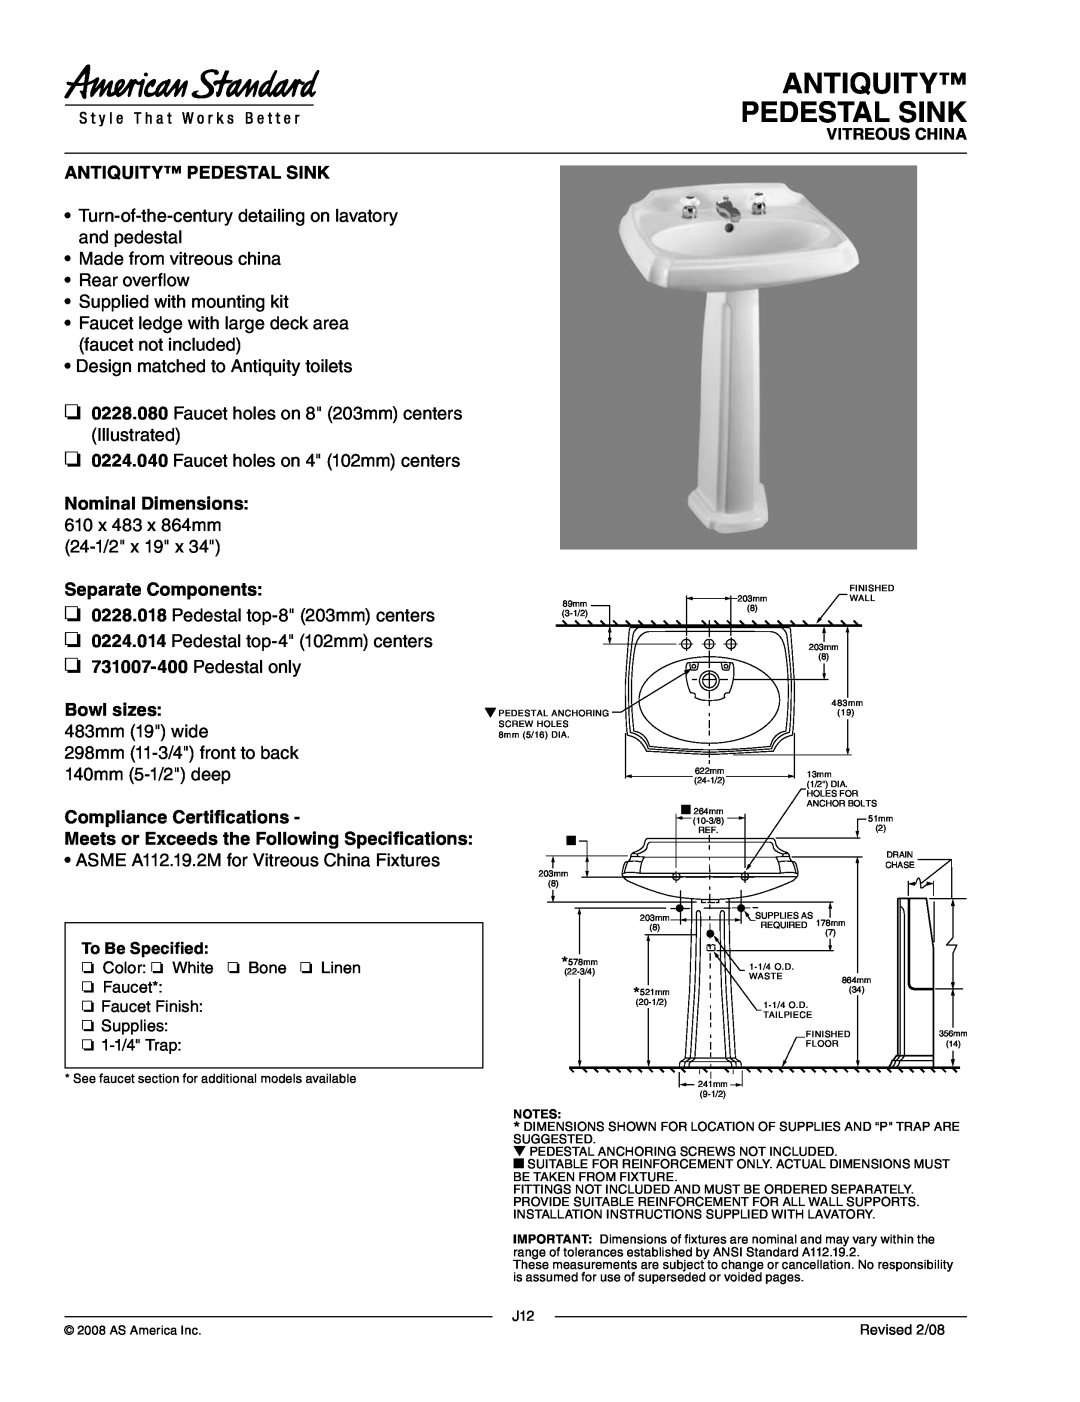 American Standard 0224.040, 0228.080 dimensions Antiquity Pedestal Sink, Separate Components, Bowl sizes 483mm 19 wide 